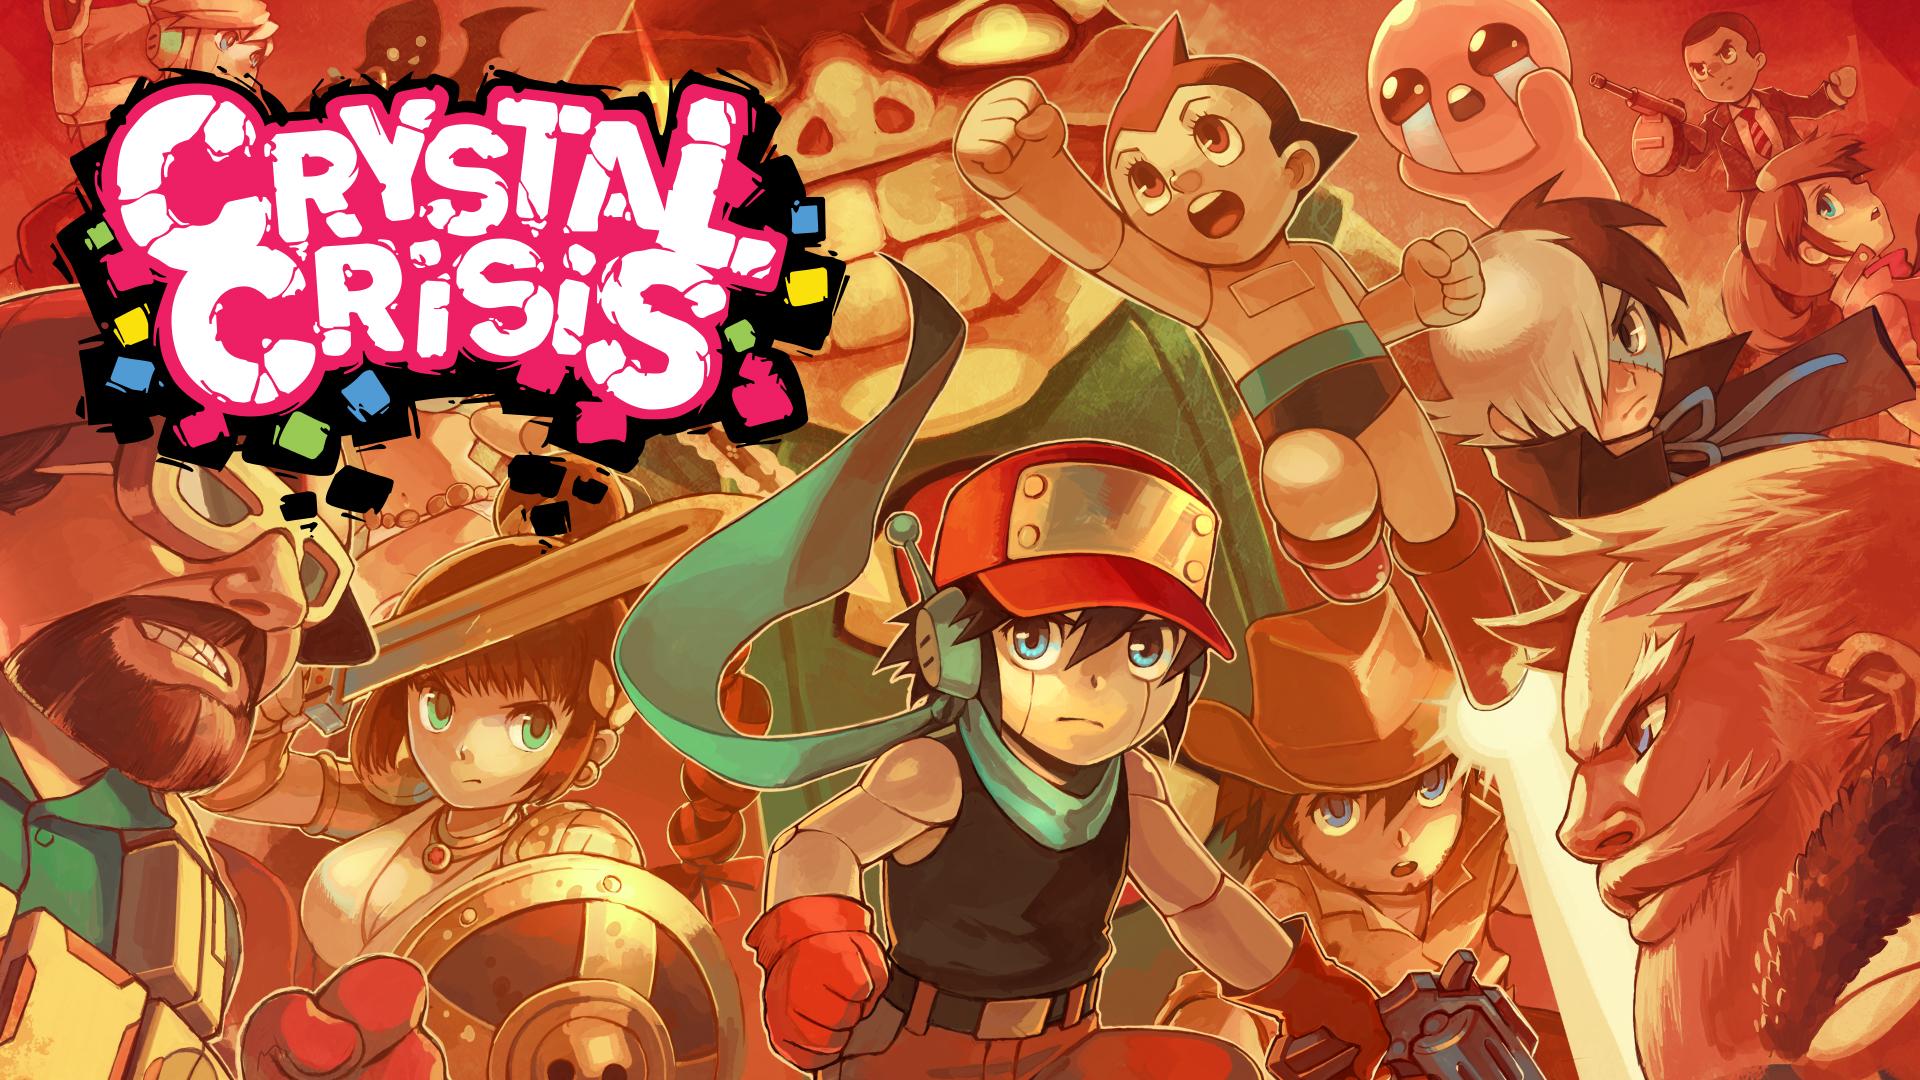 Crystal Crisis Nintendo Switch for $9.99